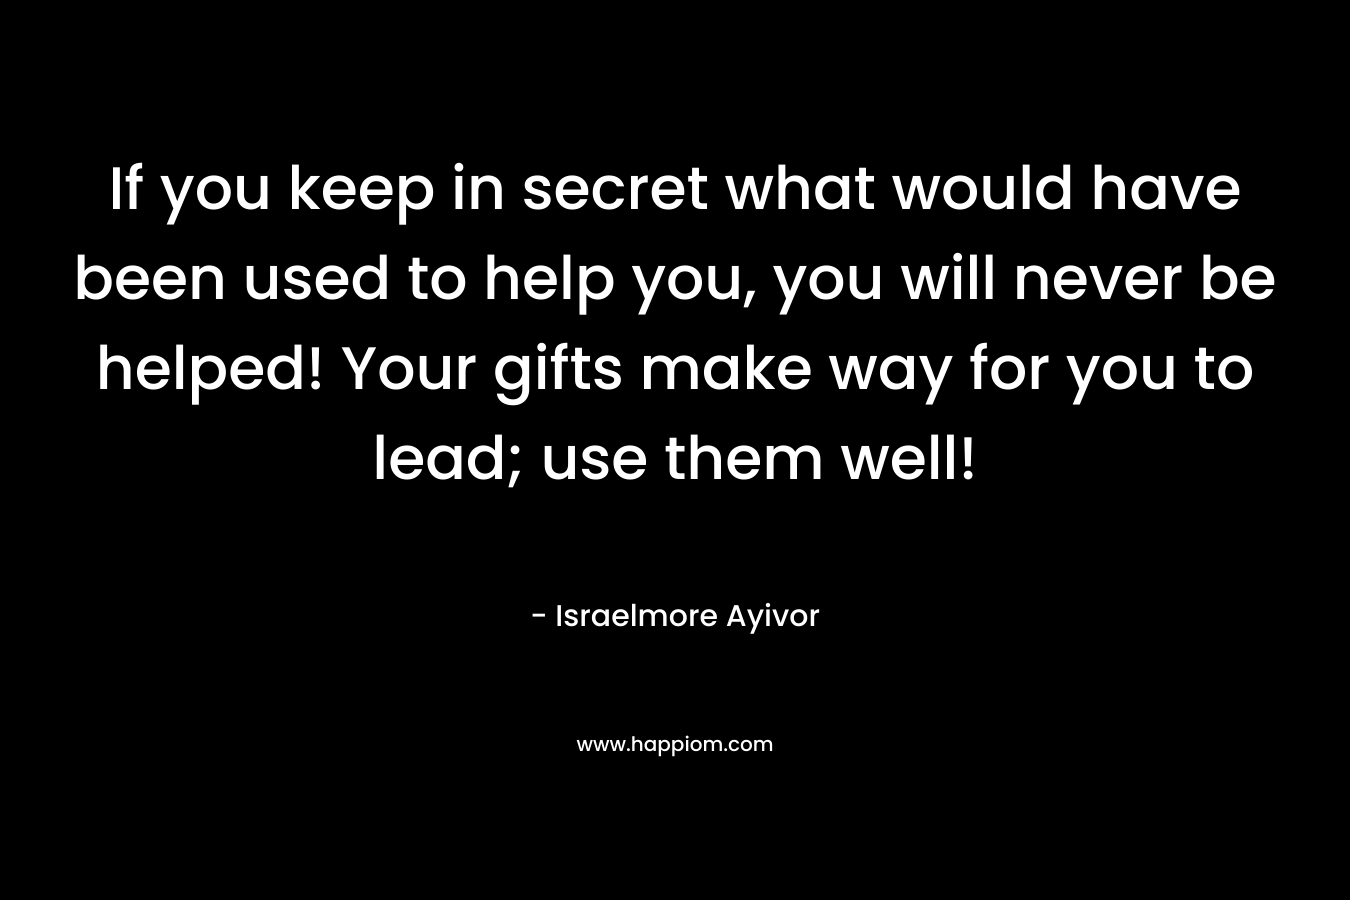 If you keep in secret what would have been used to help you, you will never be helped! Your gifts make way for you to lead; use them well!